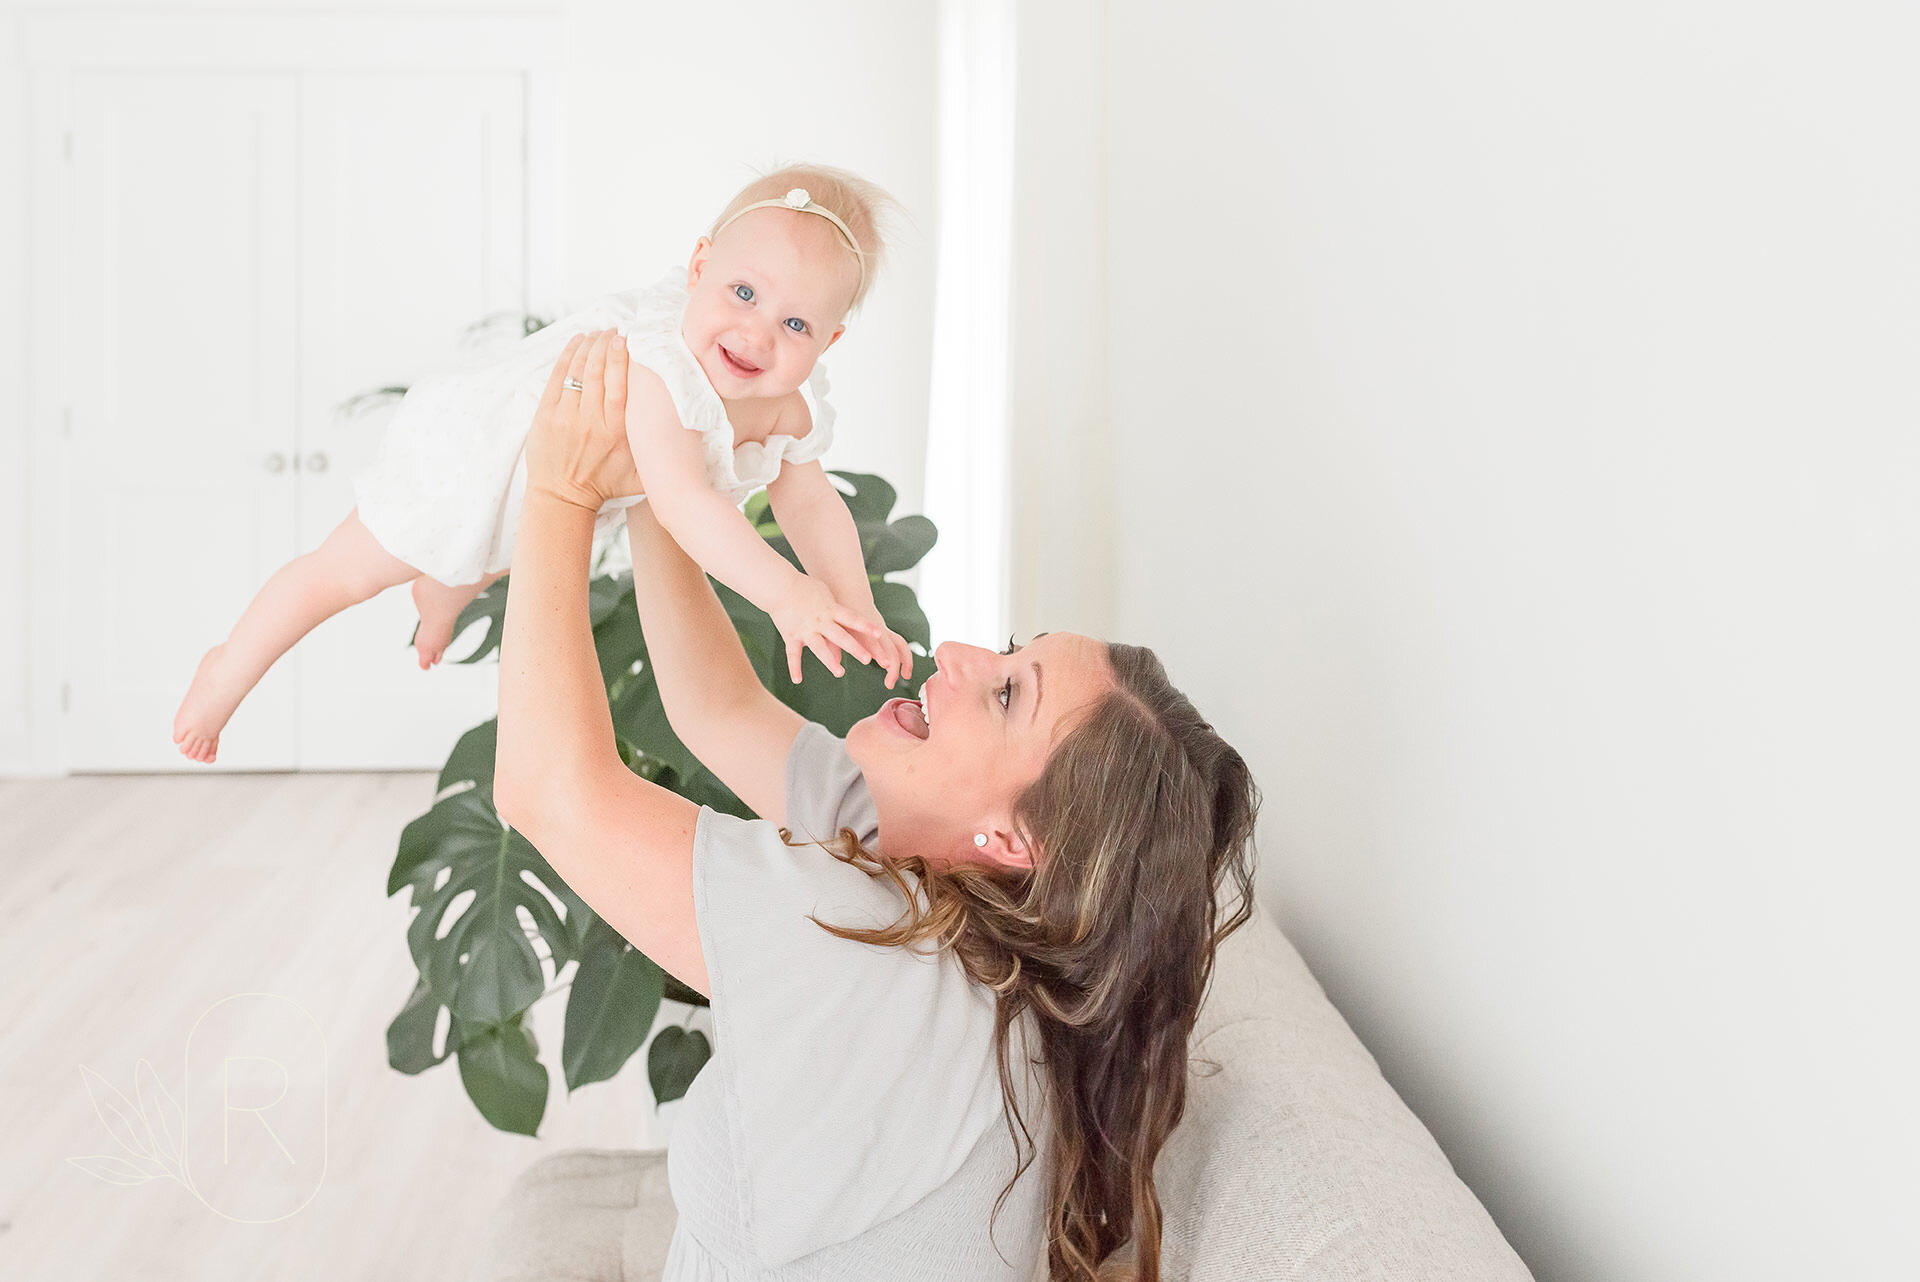 mom-lifting-baby-into-air-fun-family-photography-for-babies-grimsby-ontario.jpg